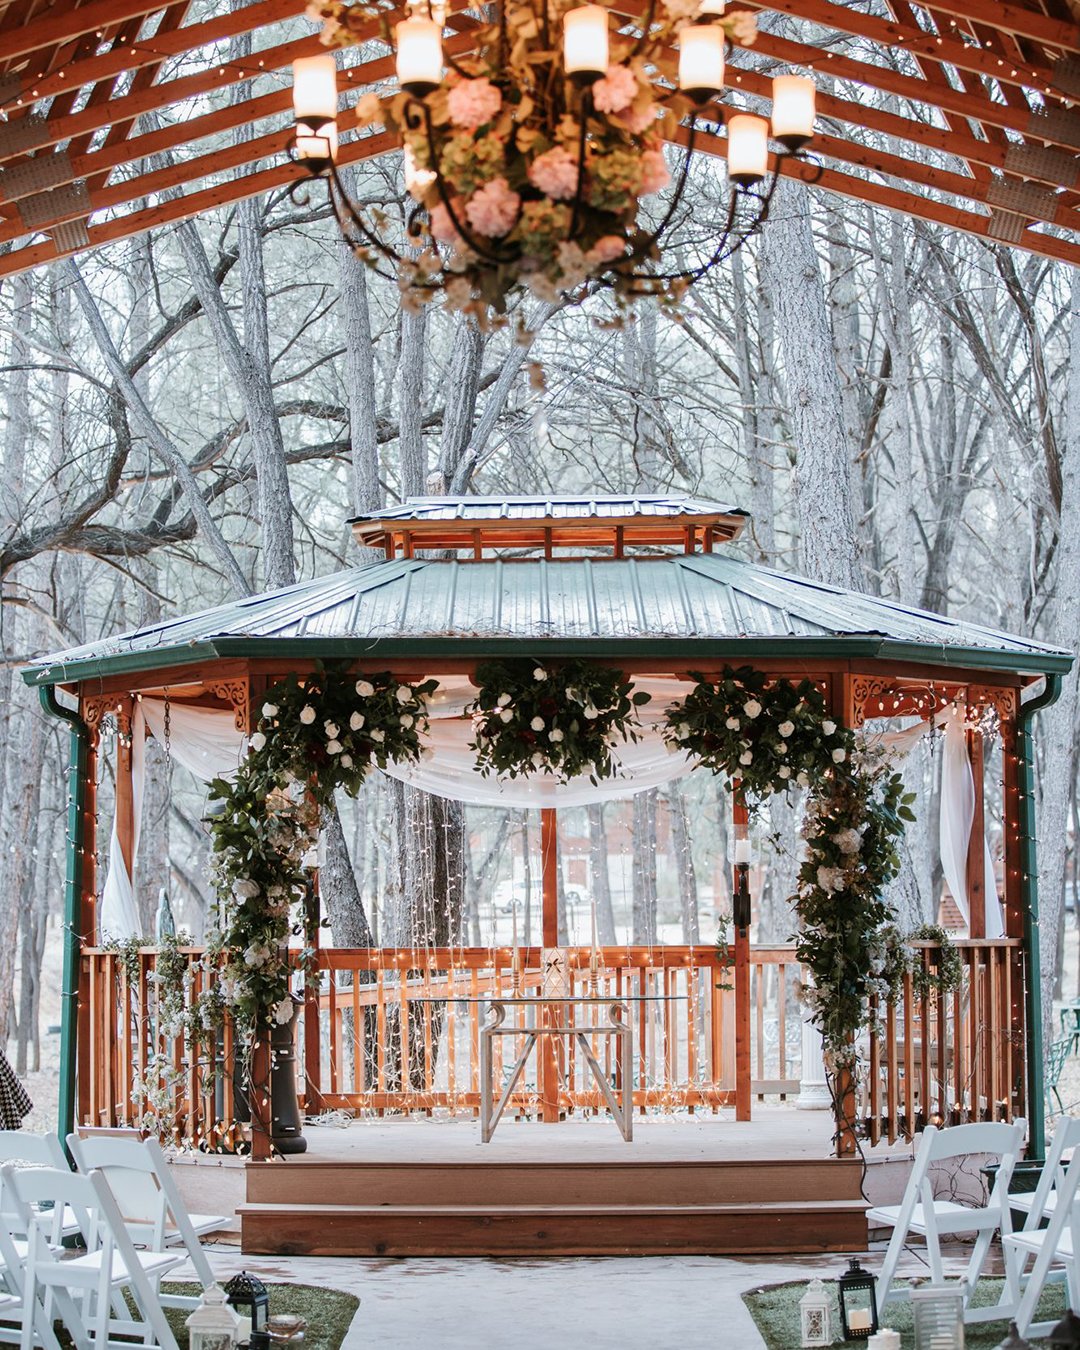 winter wedding decorations the ceremony in the gazebo is decorated with lanterns of greenery with white flowers and light fabrics emily joanne wedding films and photography